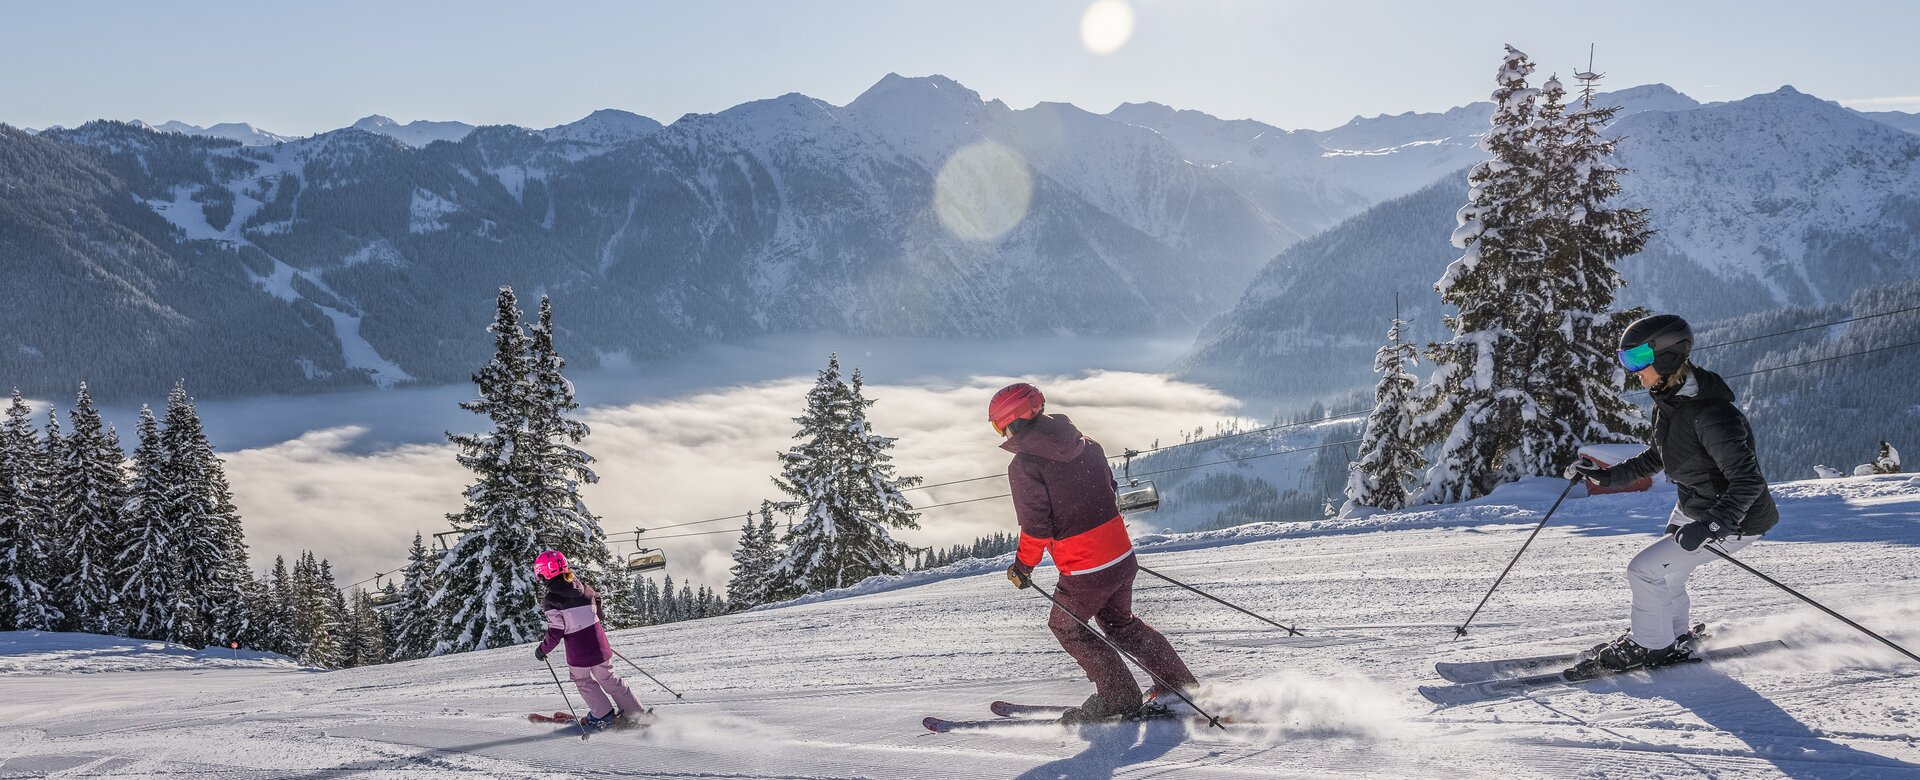 A family is skiing down the slope and all around is covered in snow | © Salzburger_Sportwelt_Michael_Groessinger